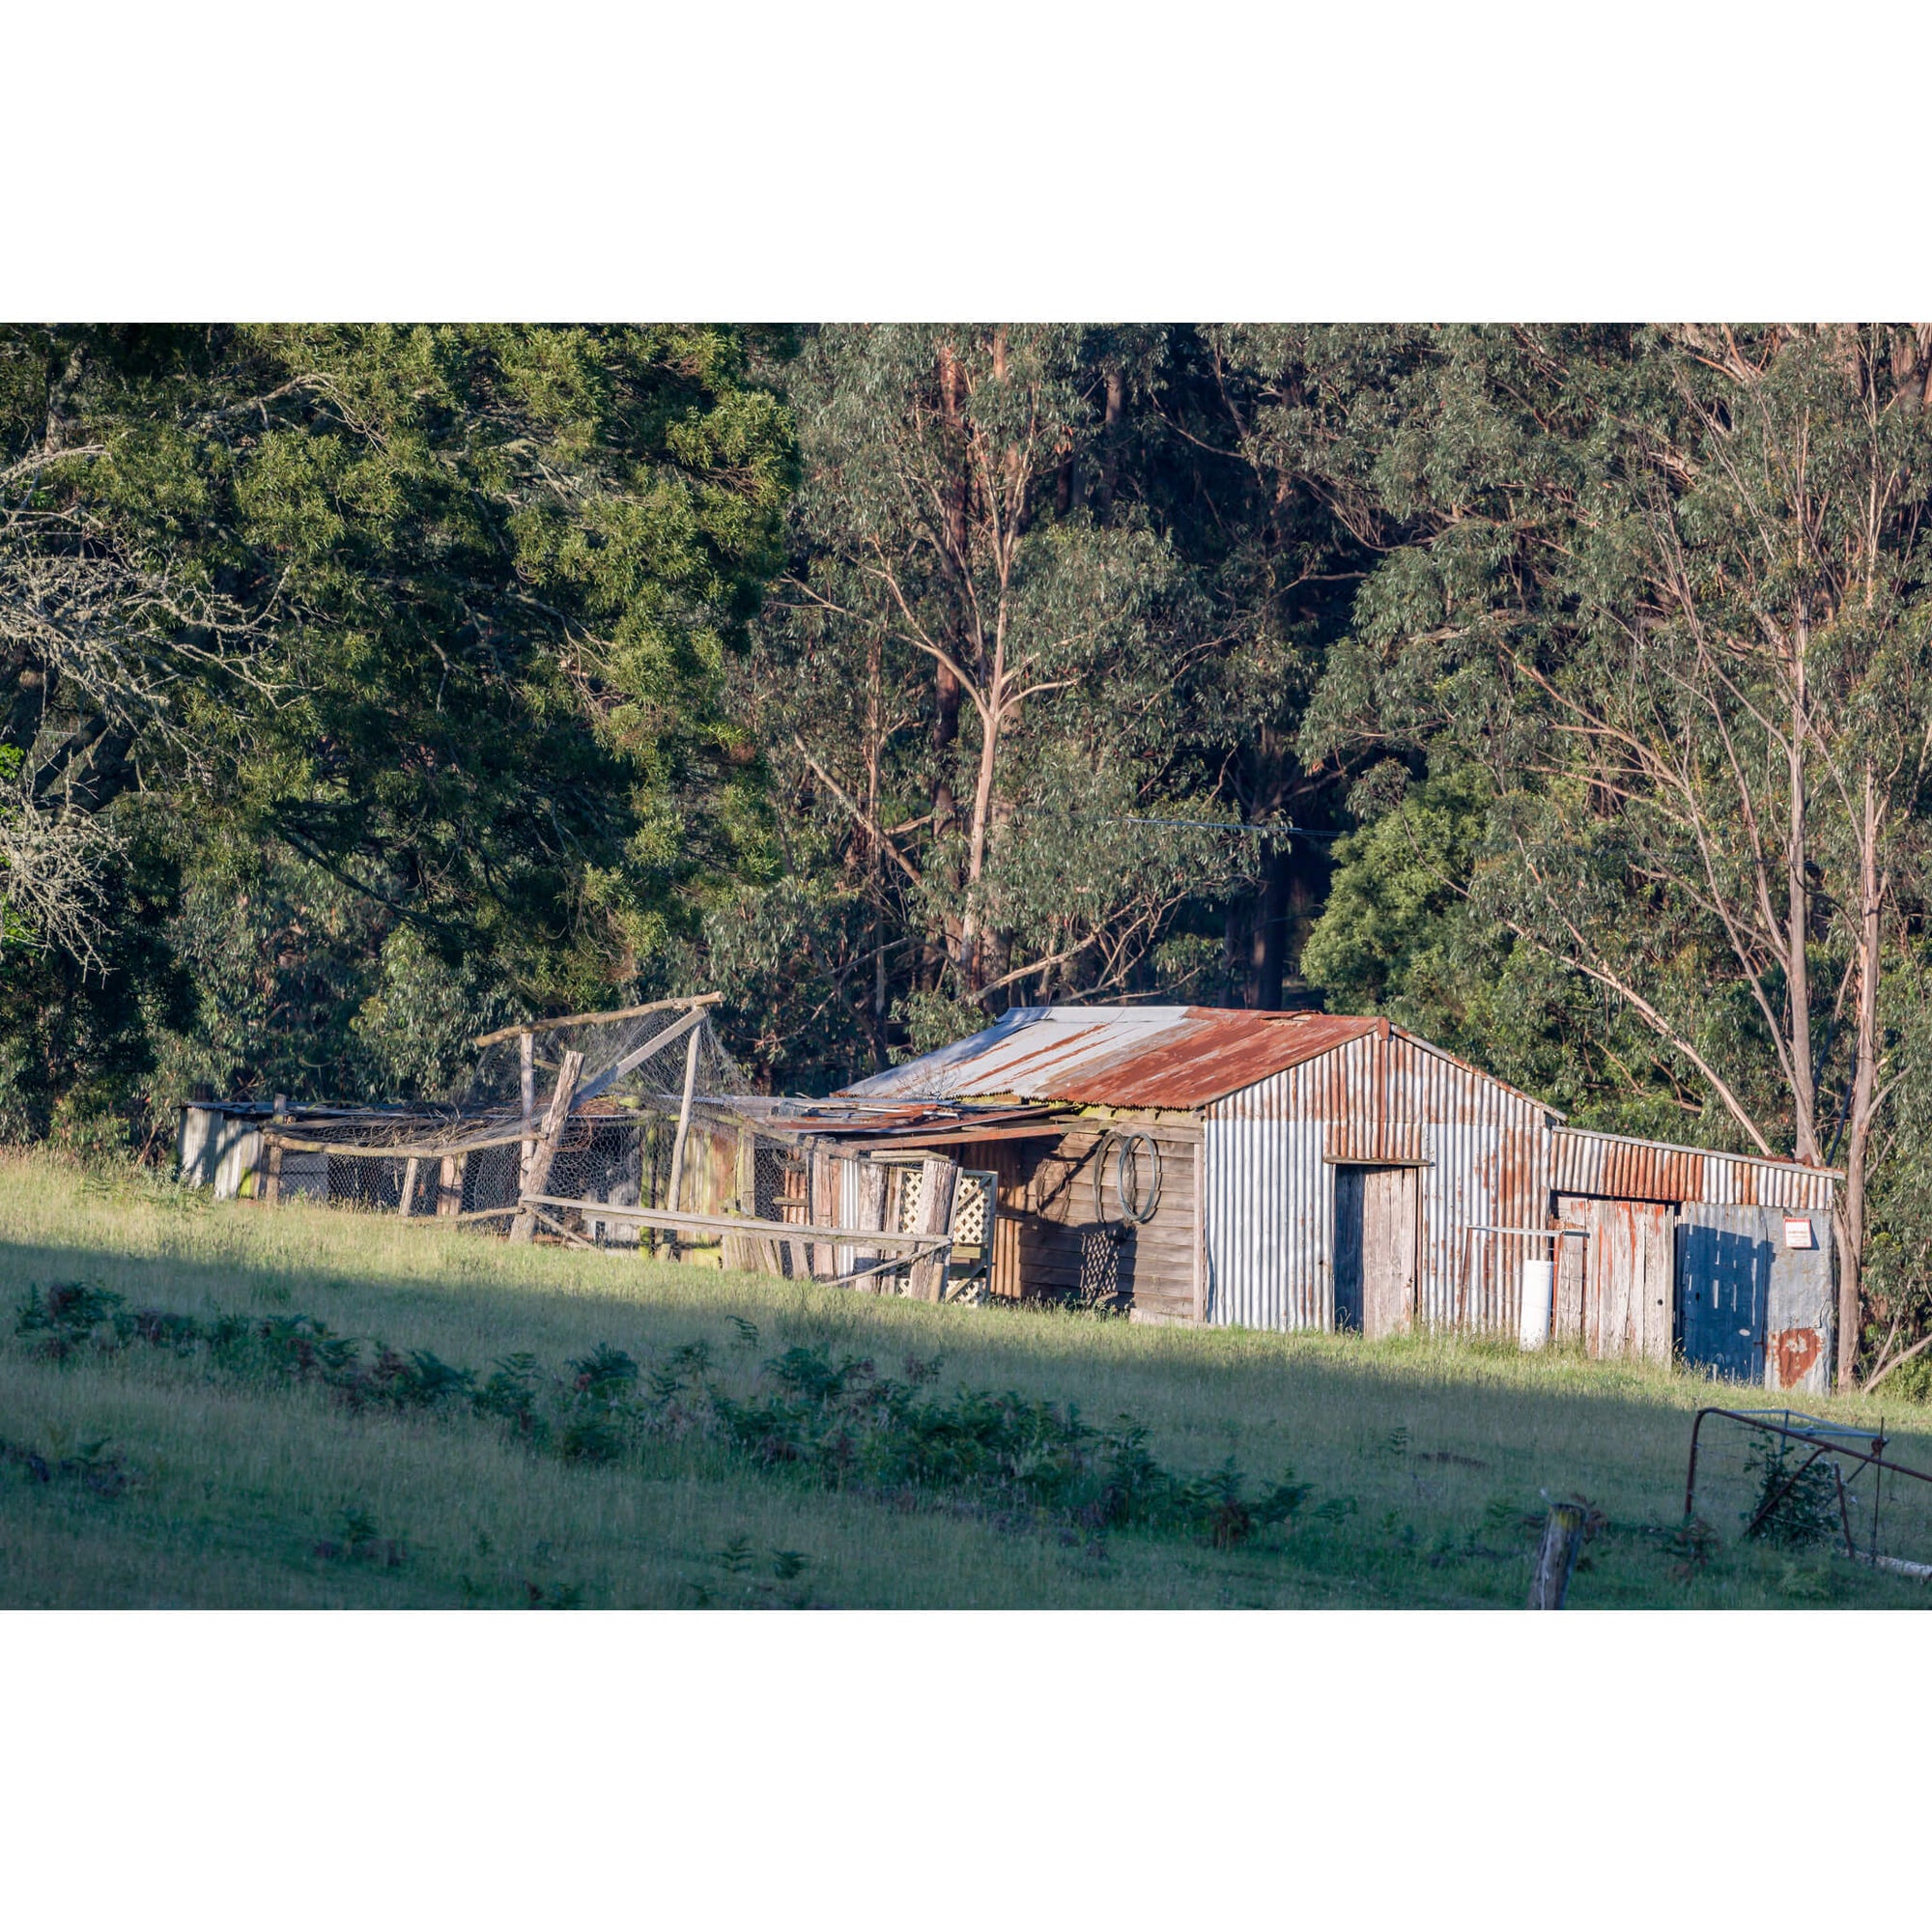 South Pambula Shed | The Woolshed